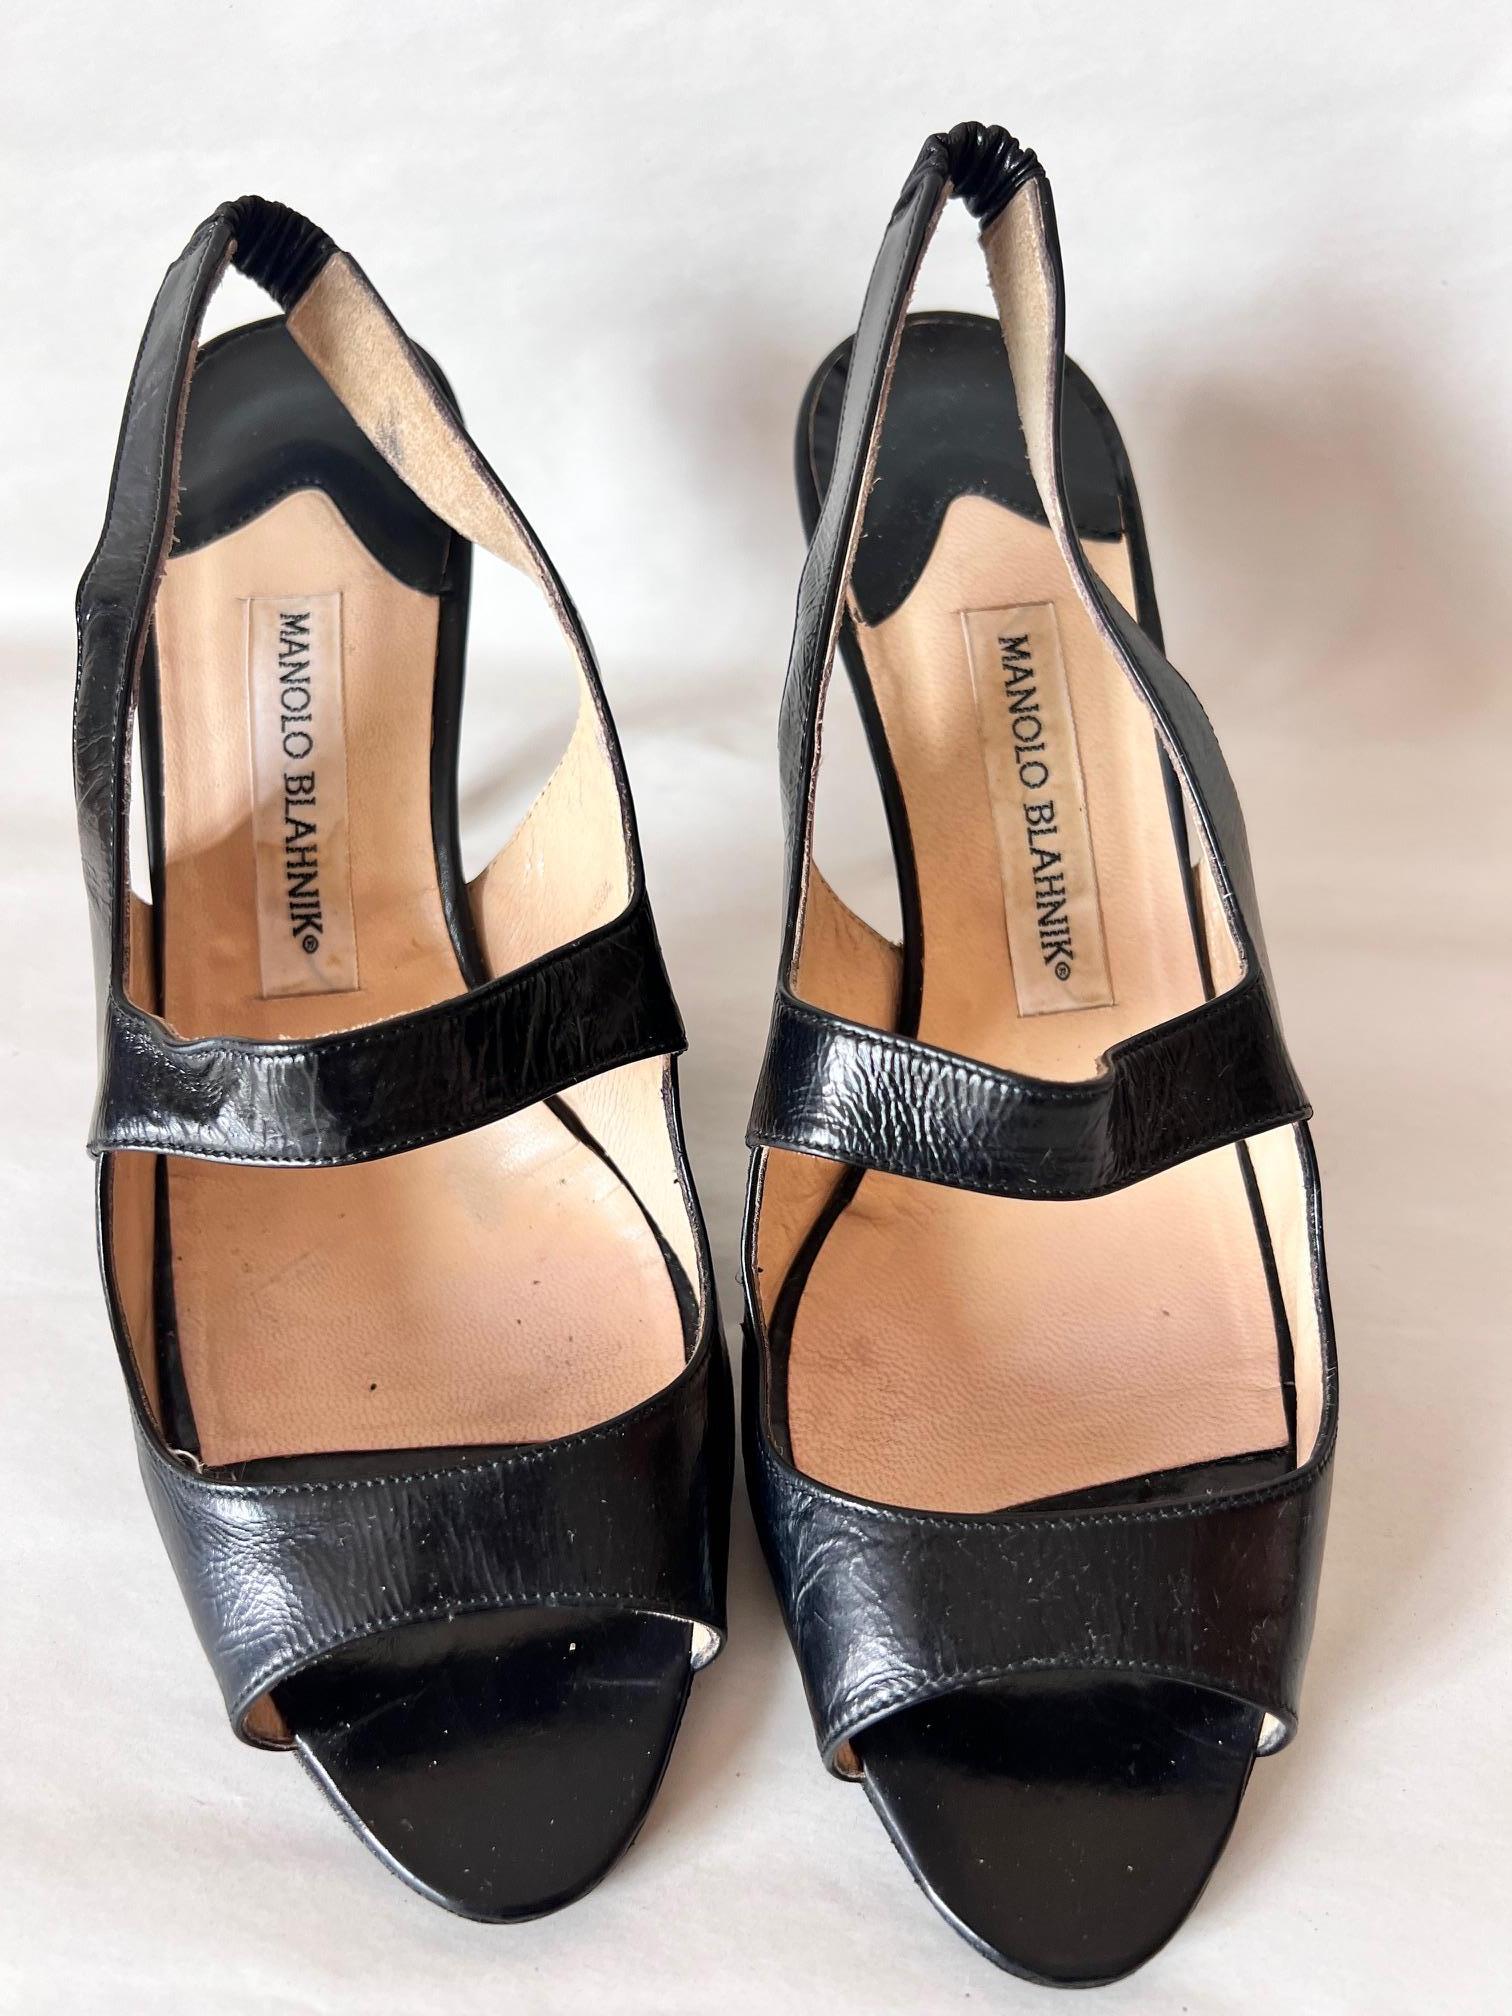 Manolo Blanick Black Satin Leather Cocktail Open Back Shoes
Made In: Italy
Color: Black
Material: Satin Leather 
Marked Size: 38,5 Europe
Heel Height: 9 cm/ 3,54 inches

His name has become synonymous with women’s luxury shoes, yet Manolo Blahnik is